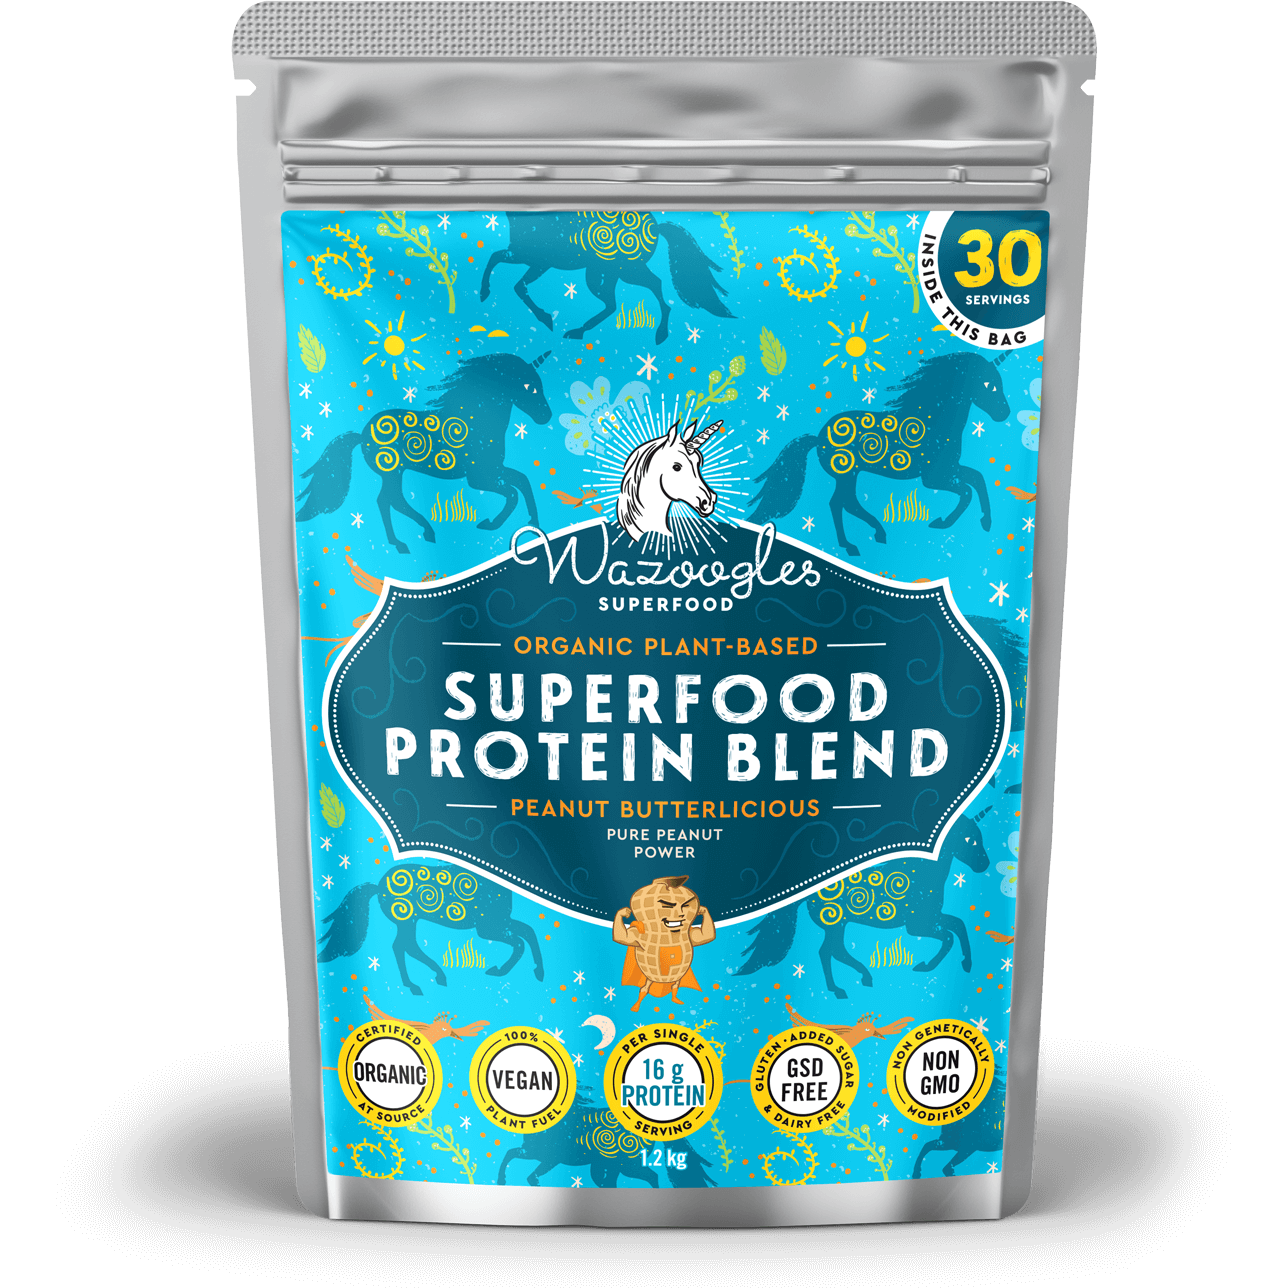 Wazoogles - Superfood Protein Blend - Peanut Butterlicious